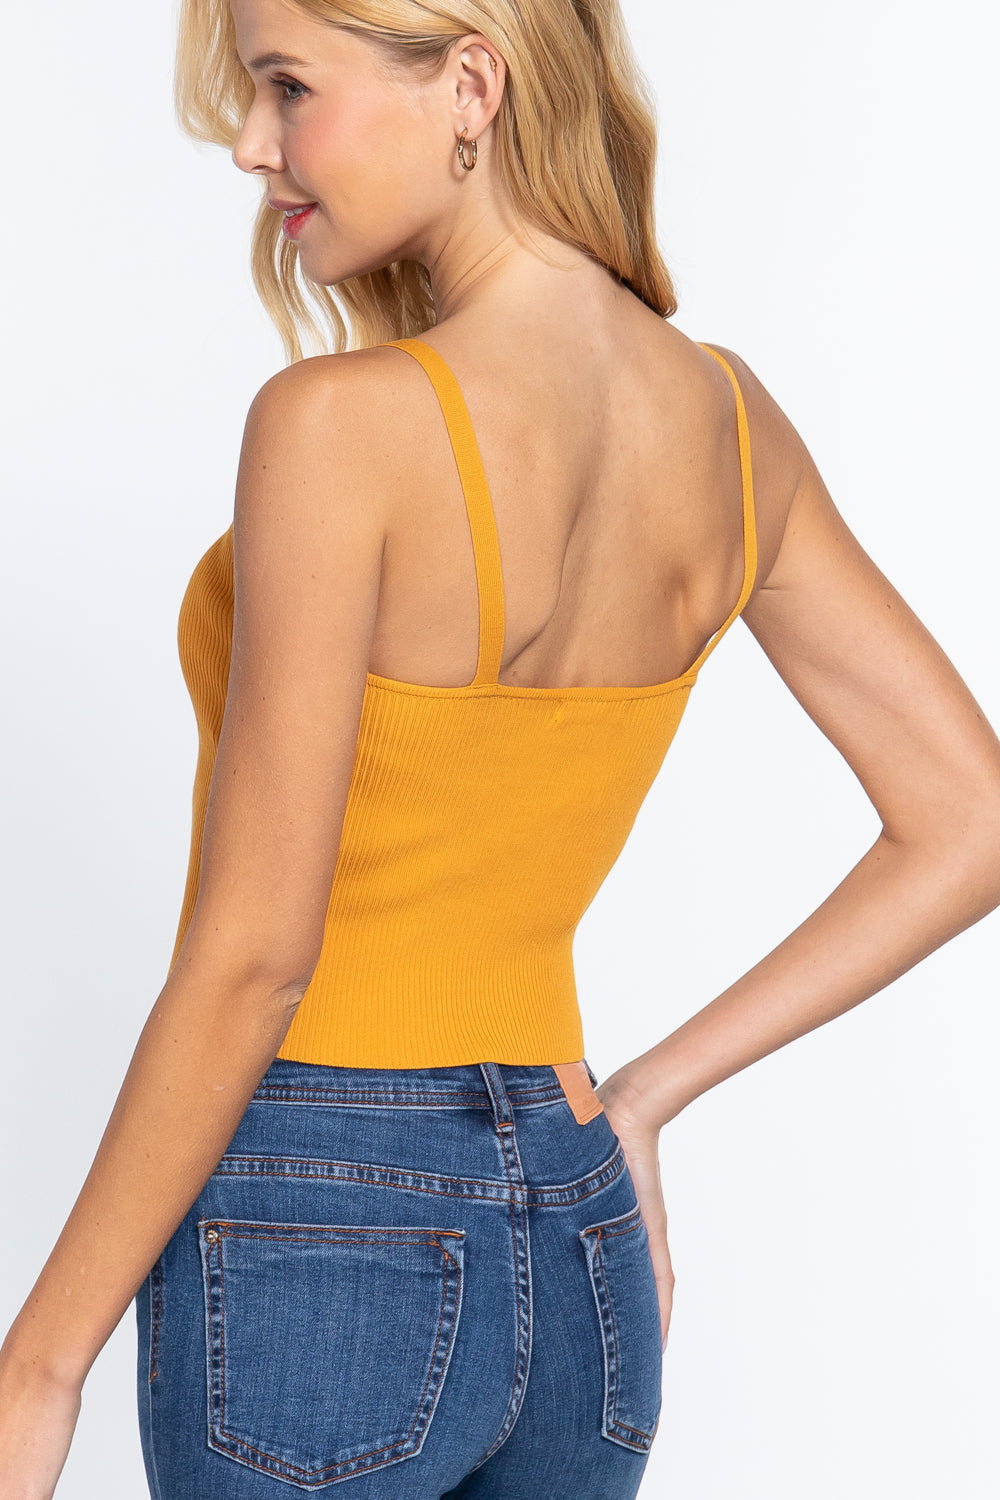 Front Closure With Hooks Sweater Cami Top Sunny EvE Fashion